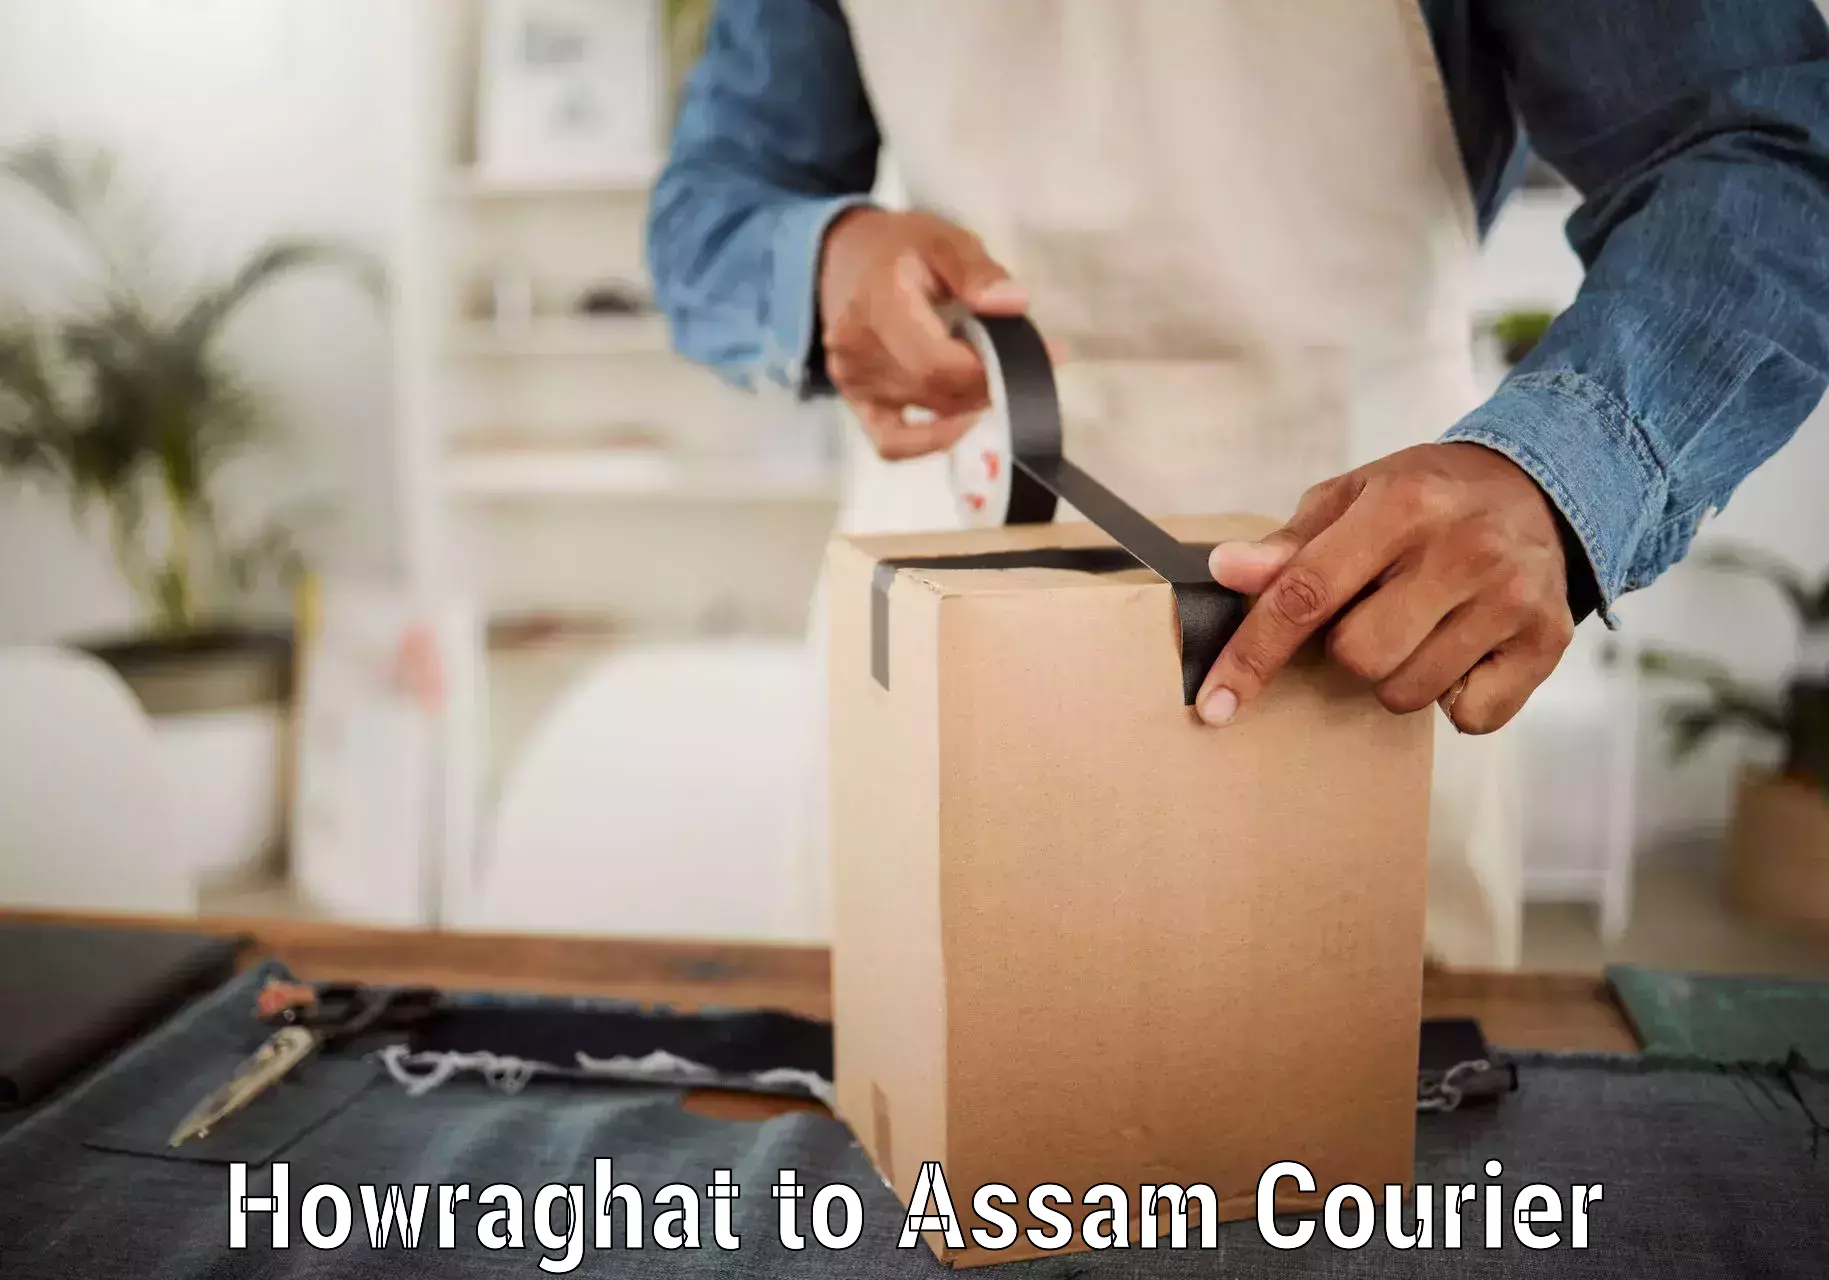 Courier service efficiency Howraghat to Golakganj